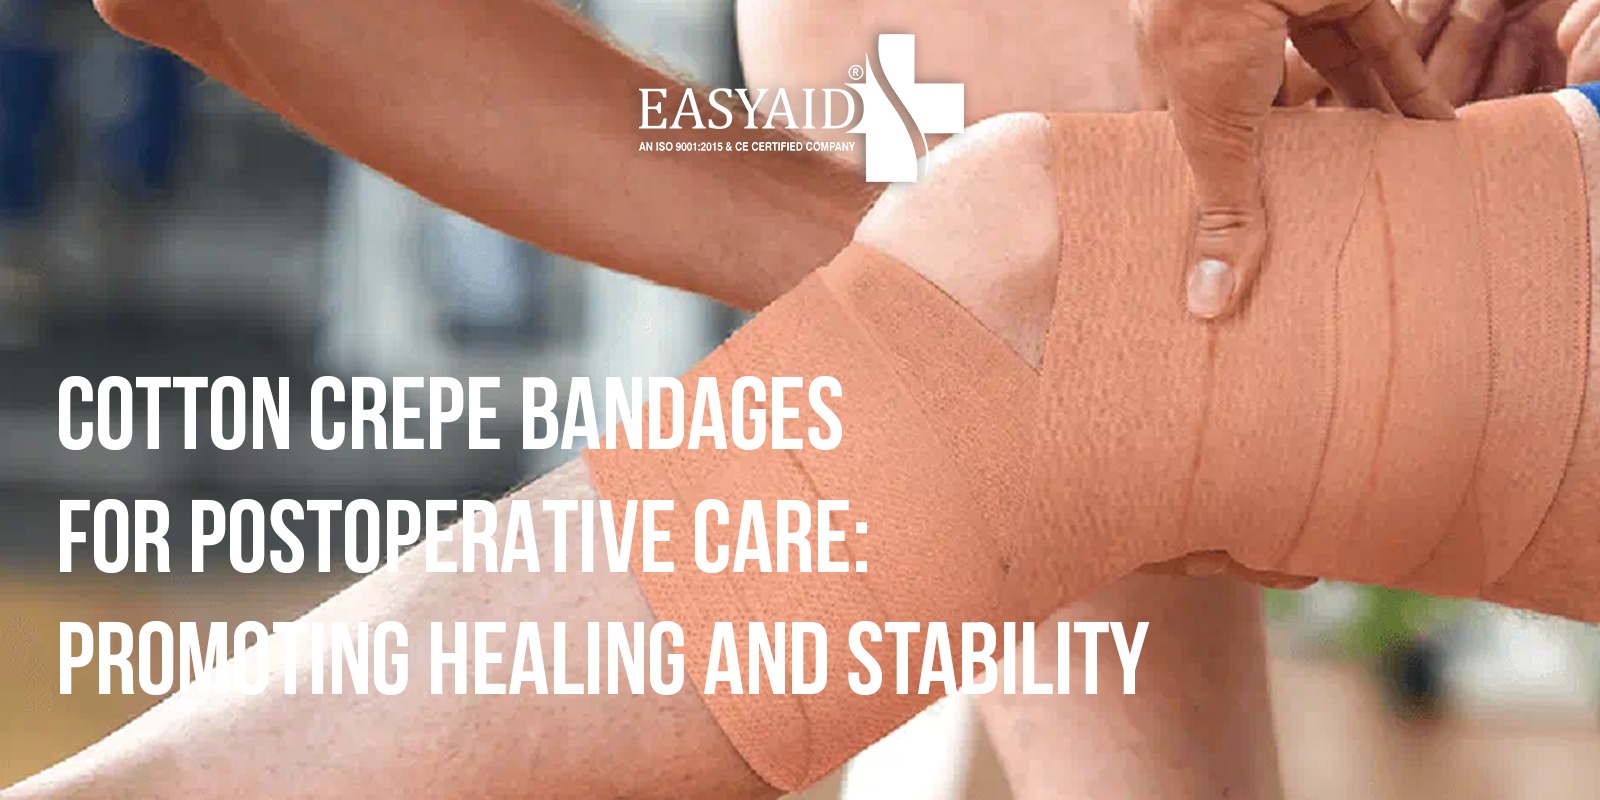 Cotton Crepe Bandages for Postoperative Care